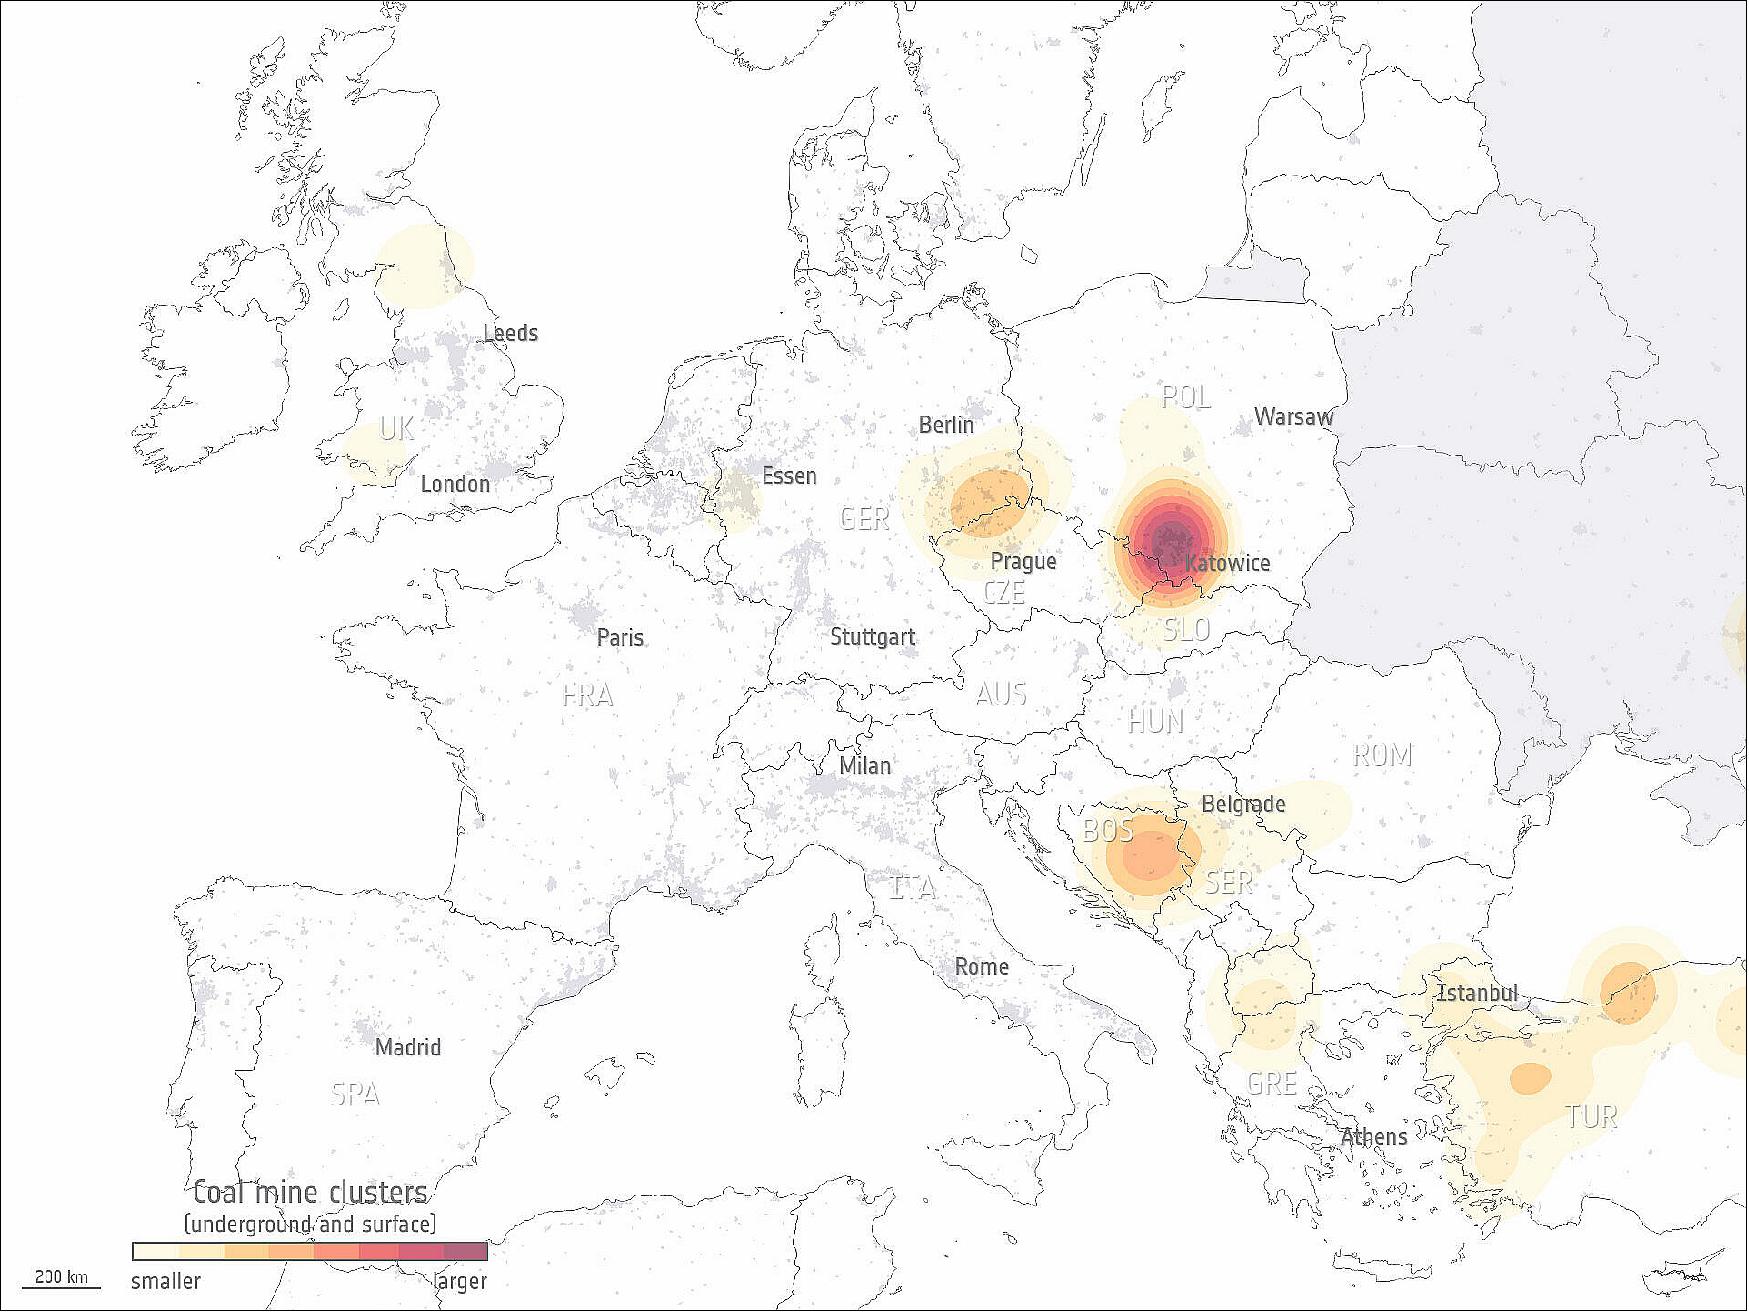 Figure 24: Coal mine clusters. This map shows the clusters of both underground and surface coal mines in Europe. The darker the red, the more coal mines there are in the area. The map uses data from the Global Coal Mine Tracker – a worldwide dataset of coal mines. The data includes operating mines producing one million tonnes per year or more, as well as smaller mines [image credit: ESA (Data source: 'Global Coal Mine Tracker', Global Energy Monitor, January 2022)]